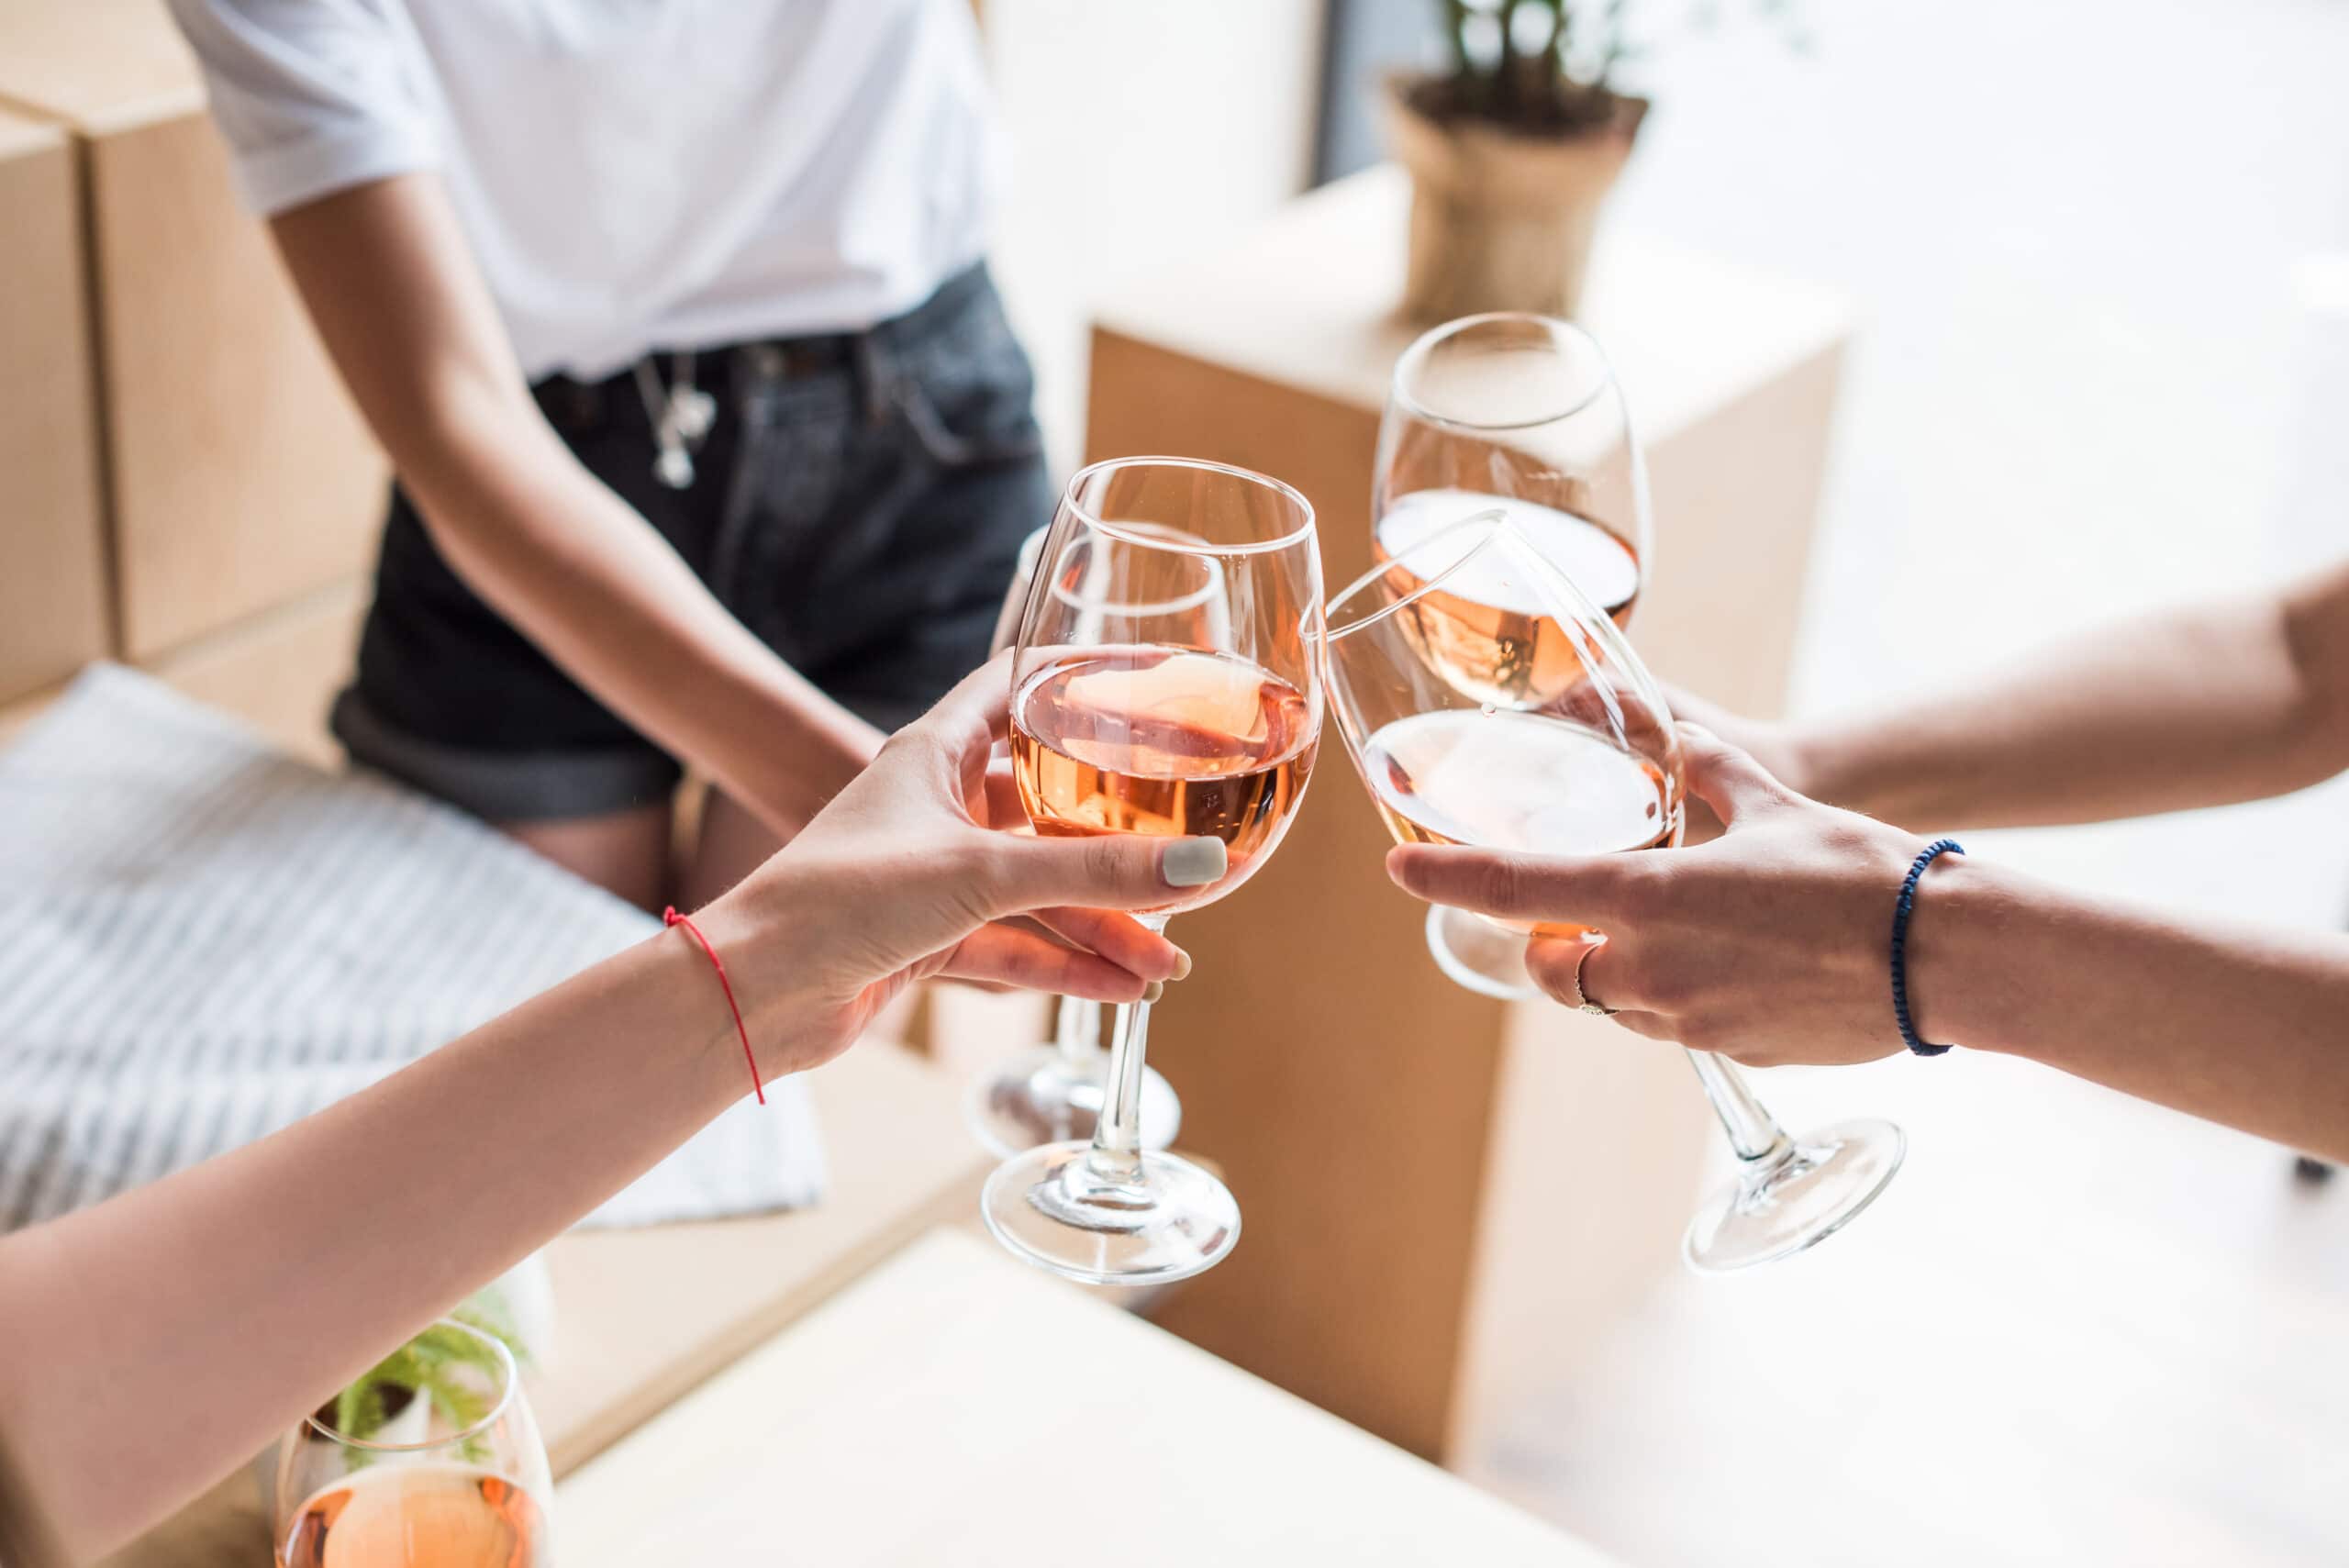 Cropped View Of Women Clinking With Wineglasses With Pink Wine